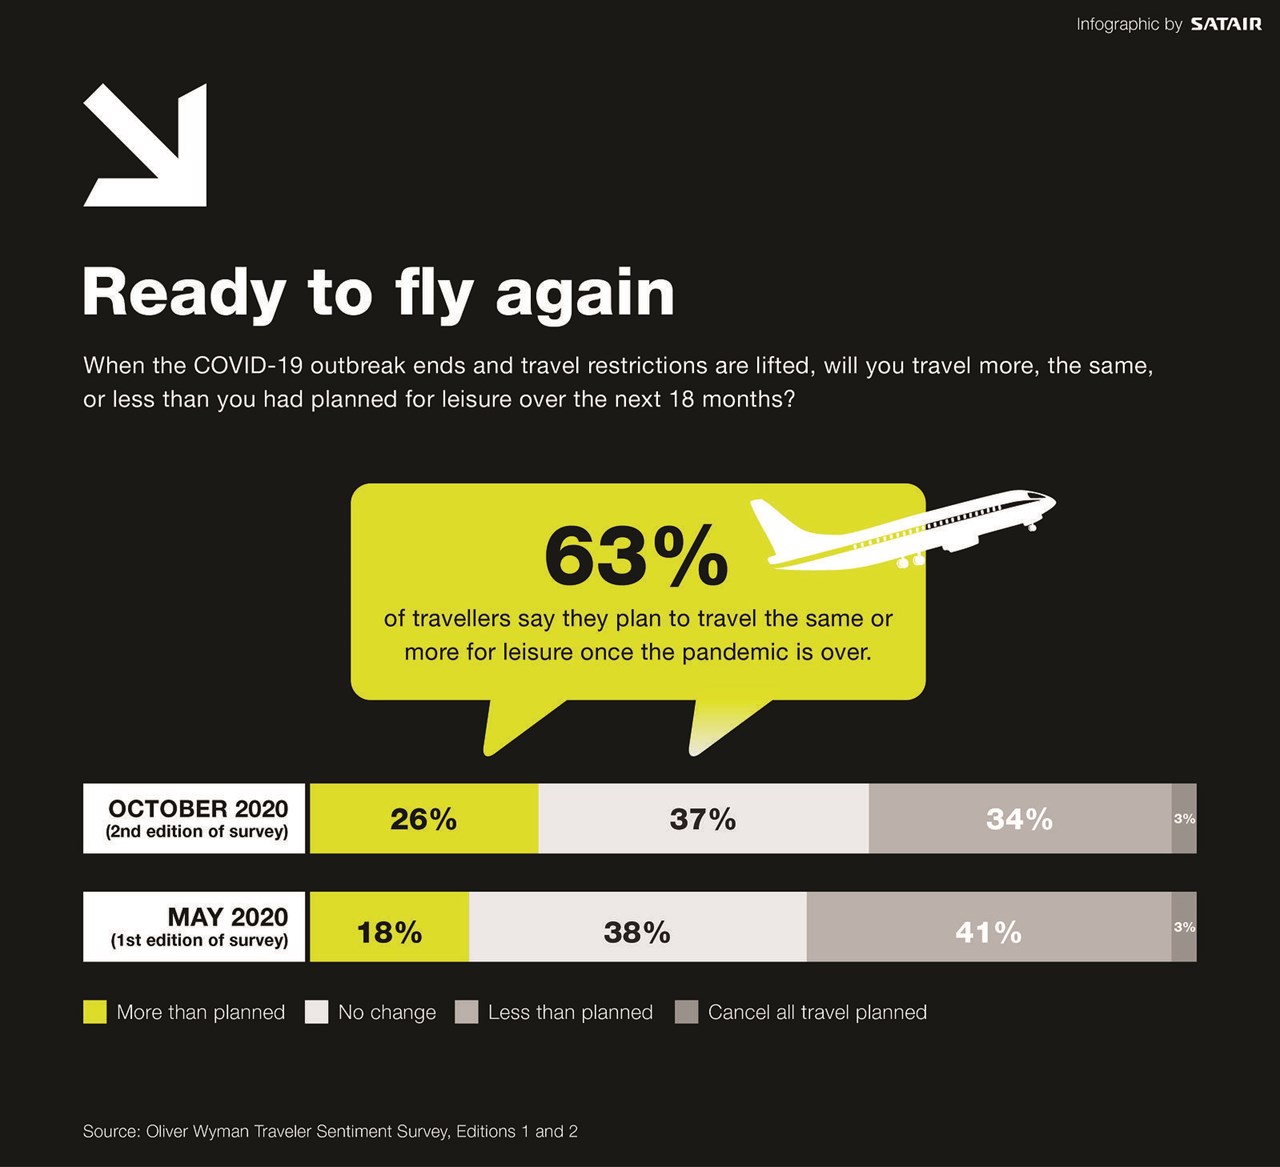 Infographic showing survey results of those ready to fly again